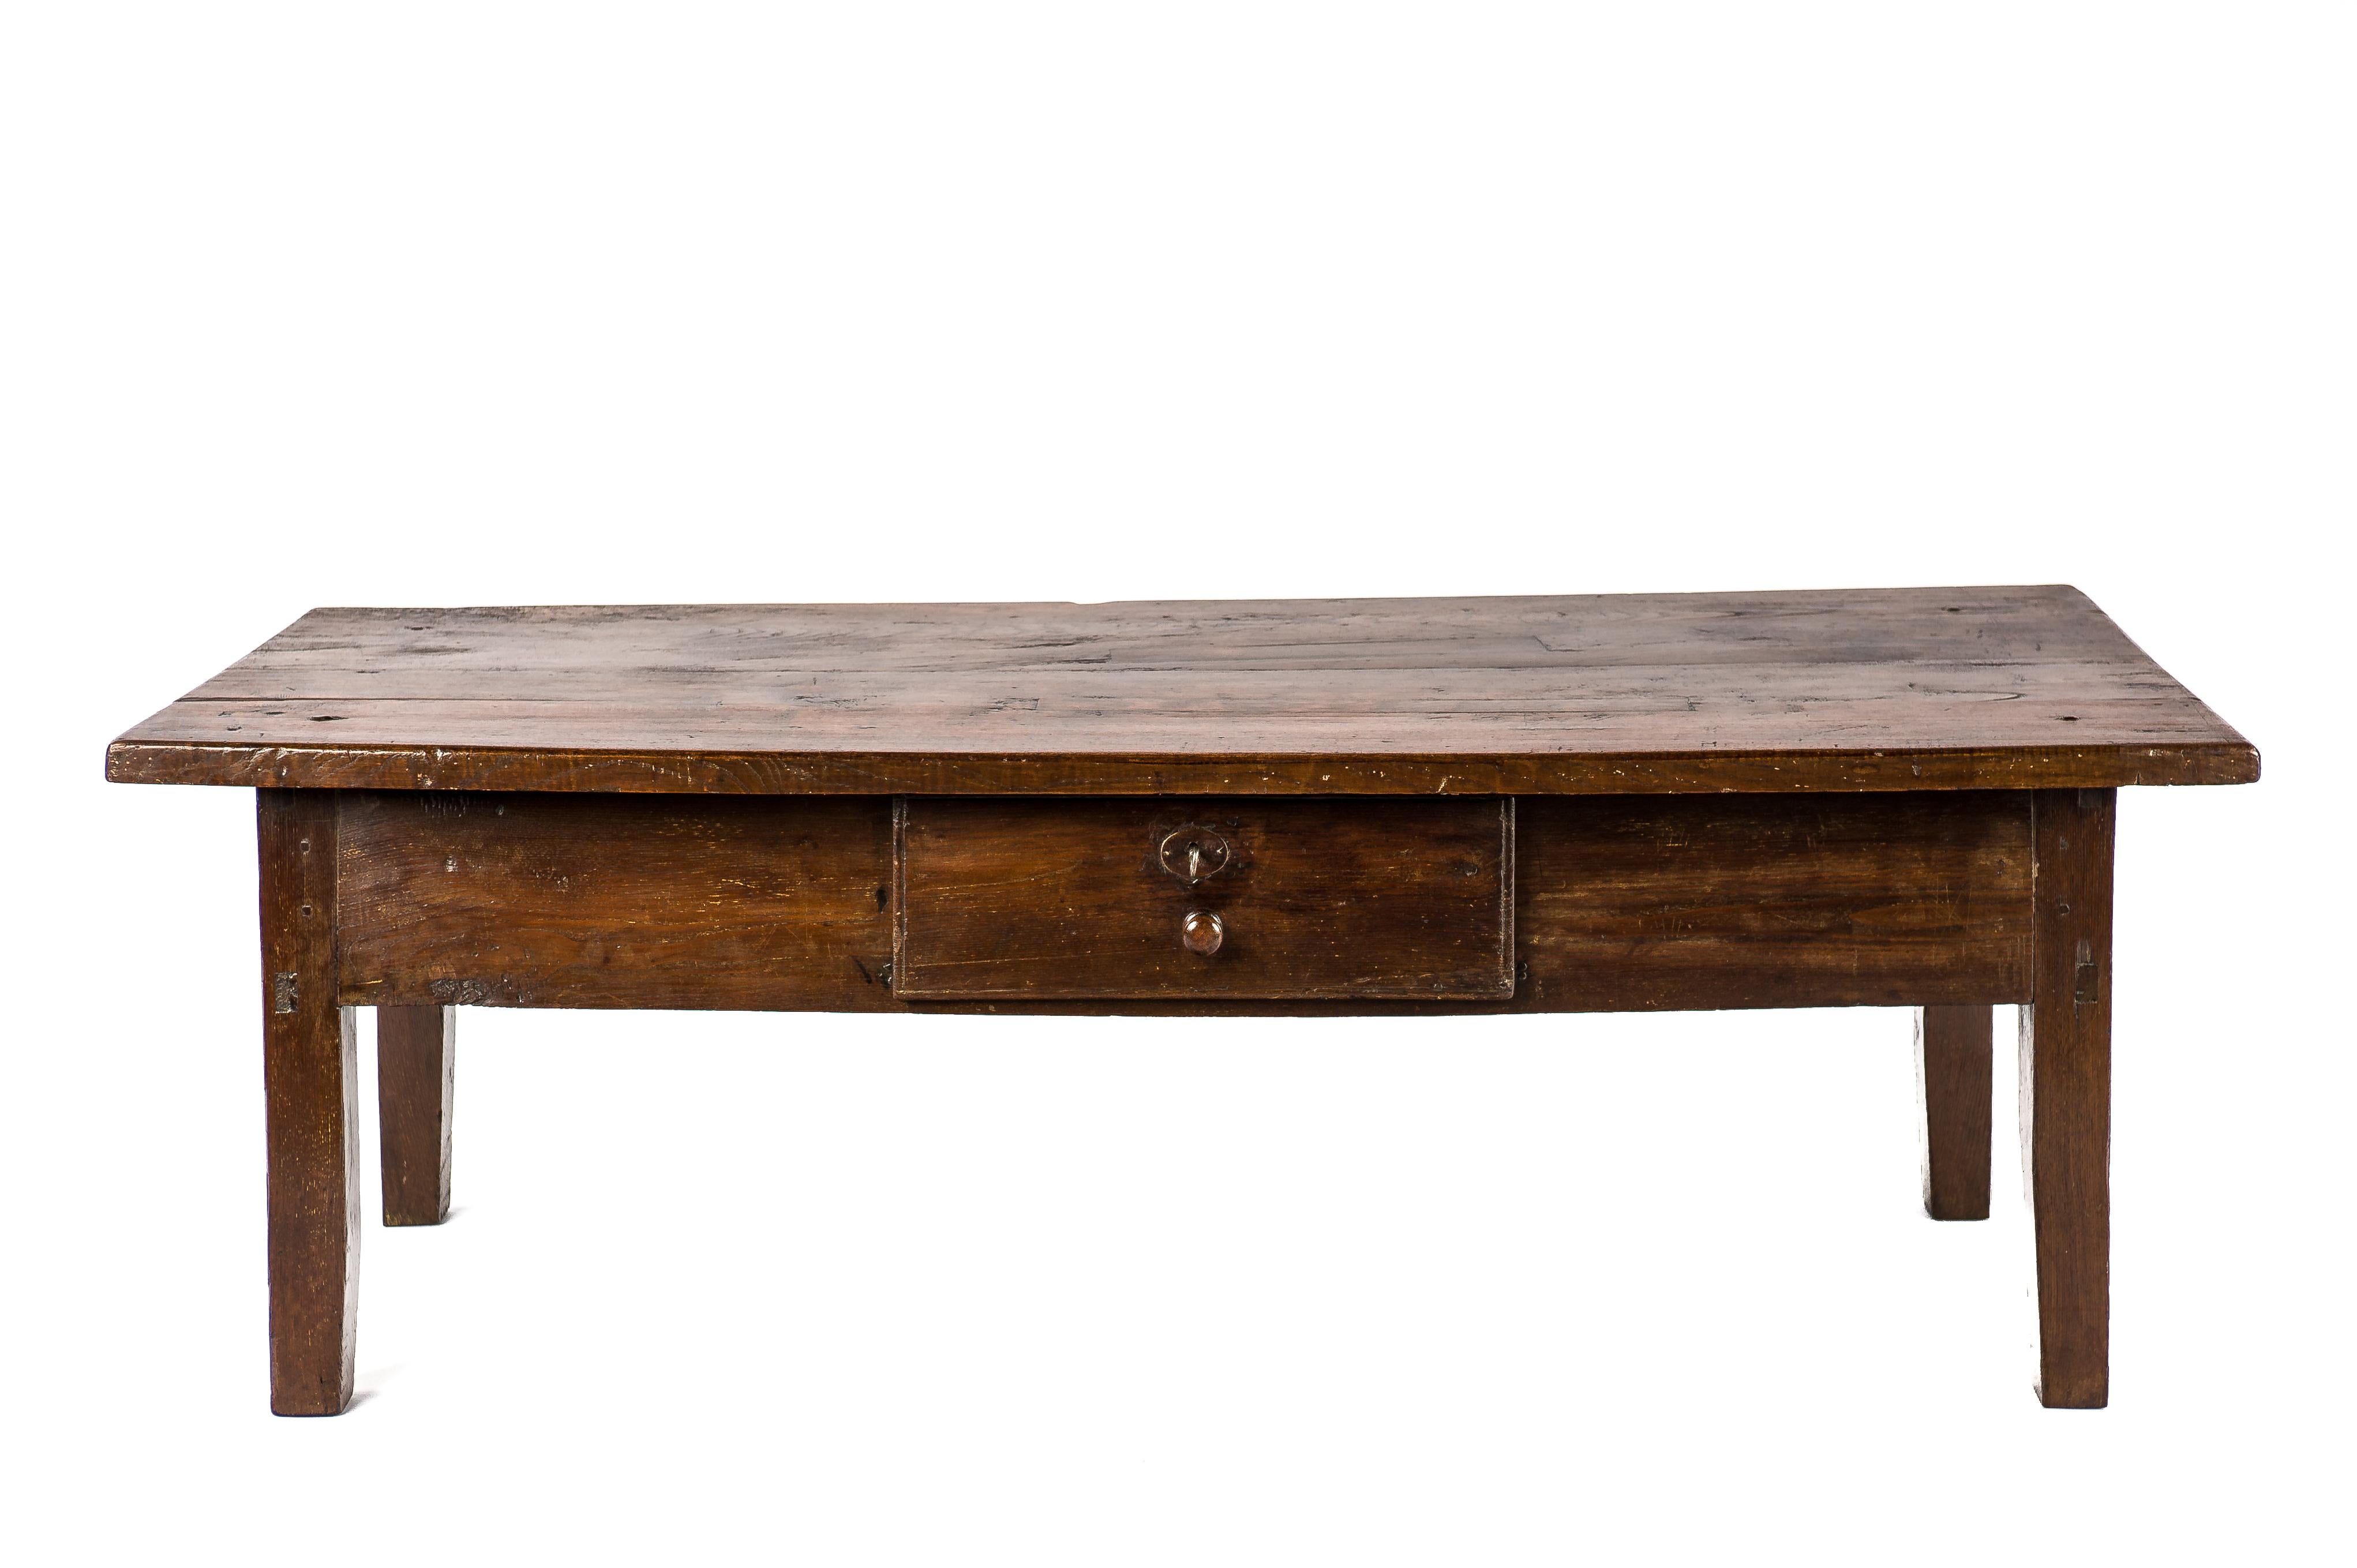 This beautiful warm brown color rustic coffee table or low table originates in rural Spain and dates circa 1820. The table has a fantastic top that was made from two boards of solid chestnut wood 1.38 inches thick. The top has a beautiful grain